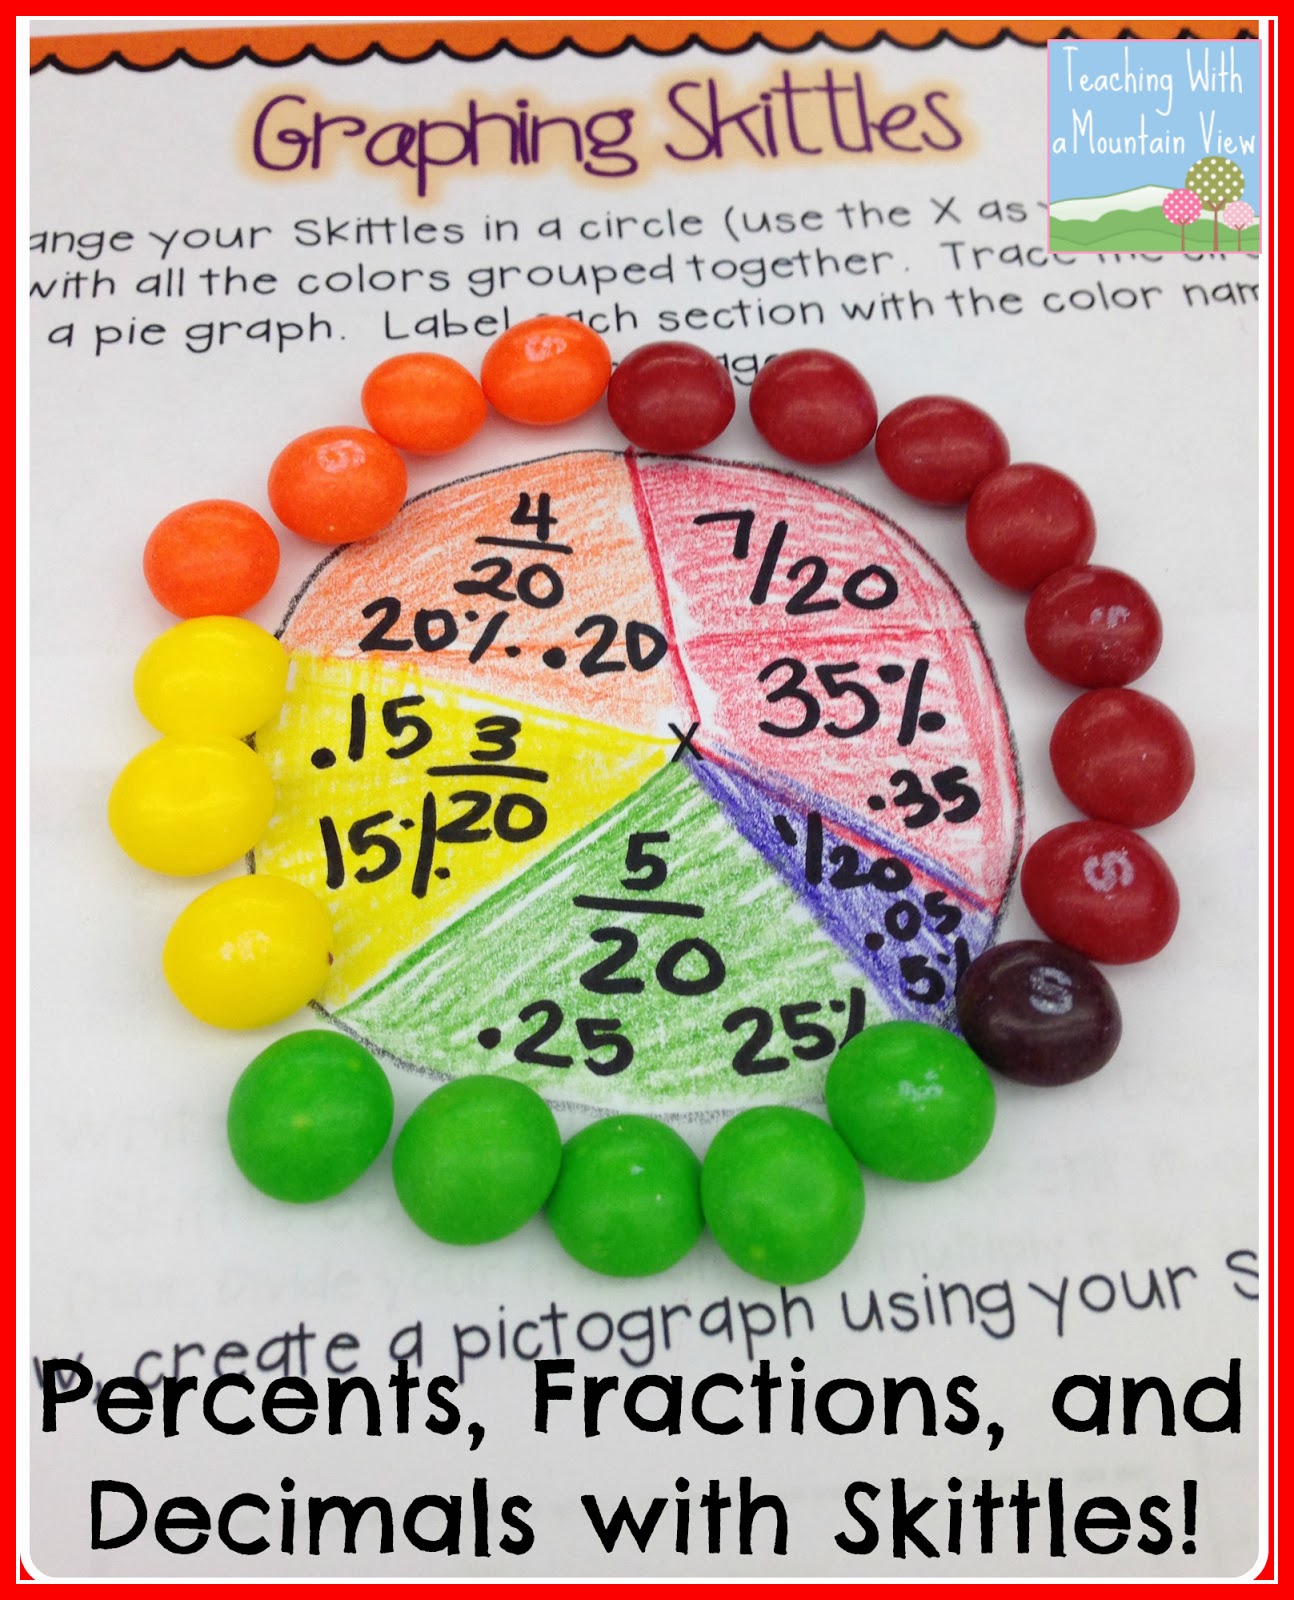 Teaching With a Mountain View: Percents, Decimals, Fractions and a Freebie!